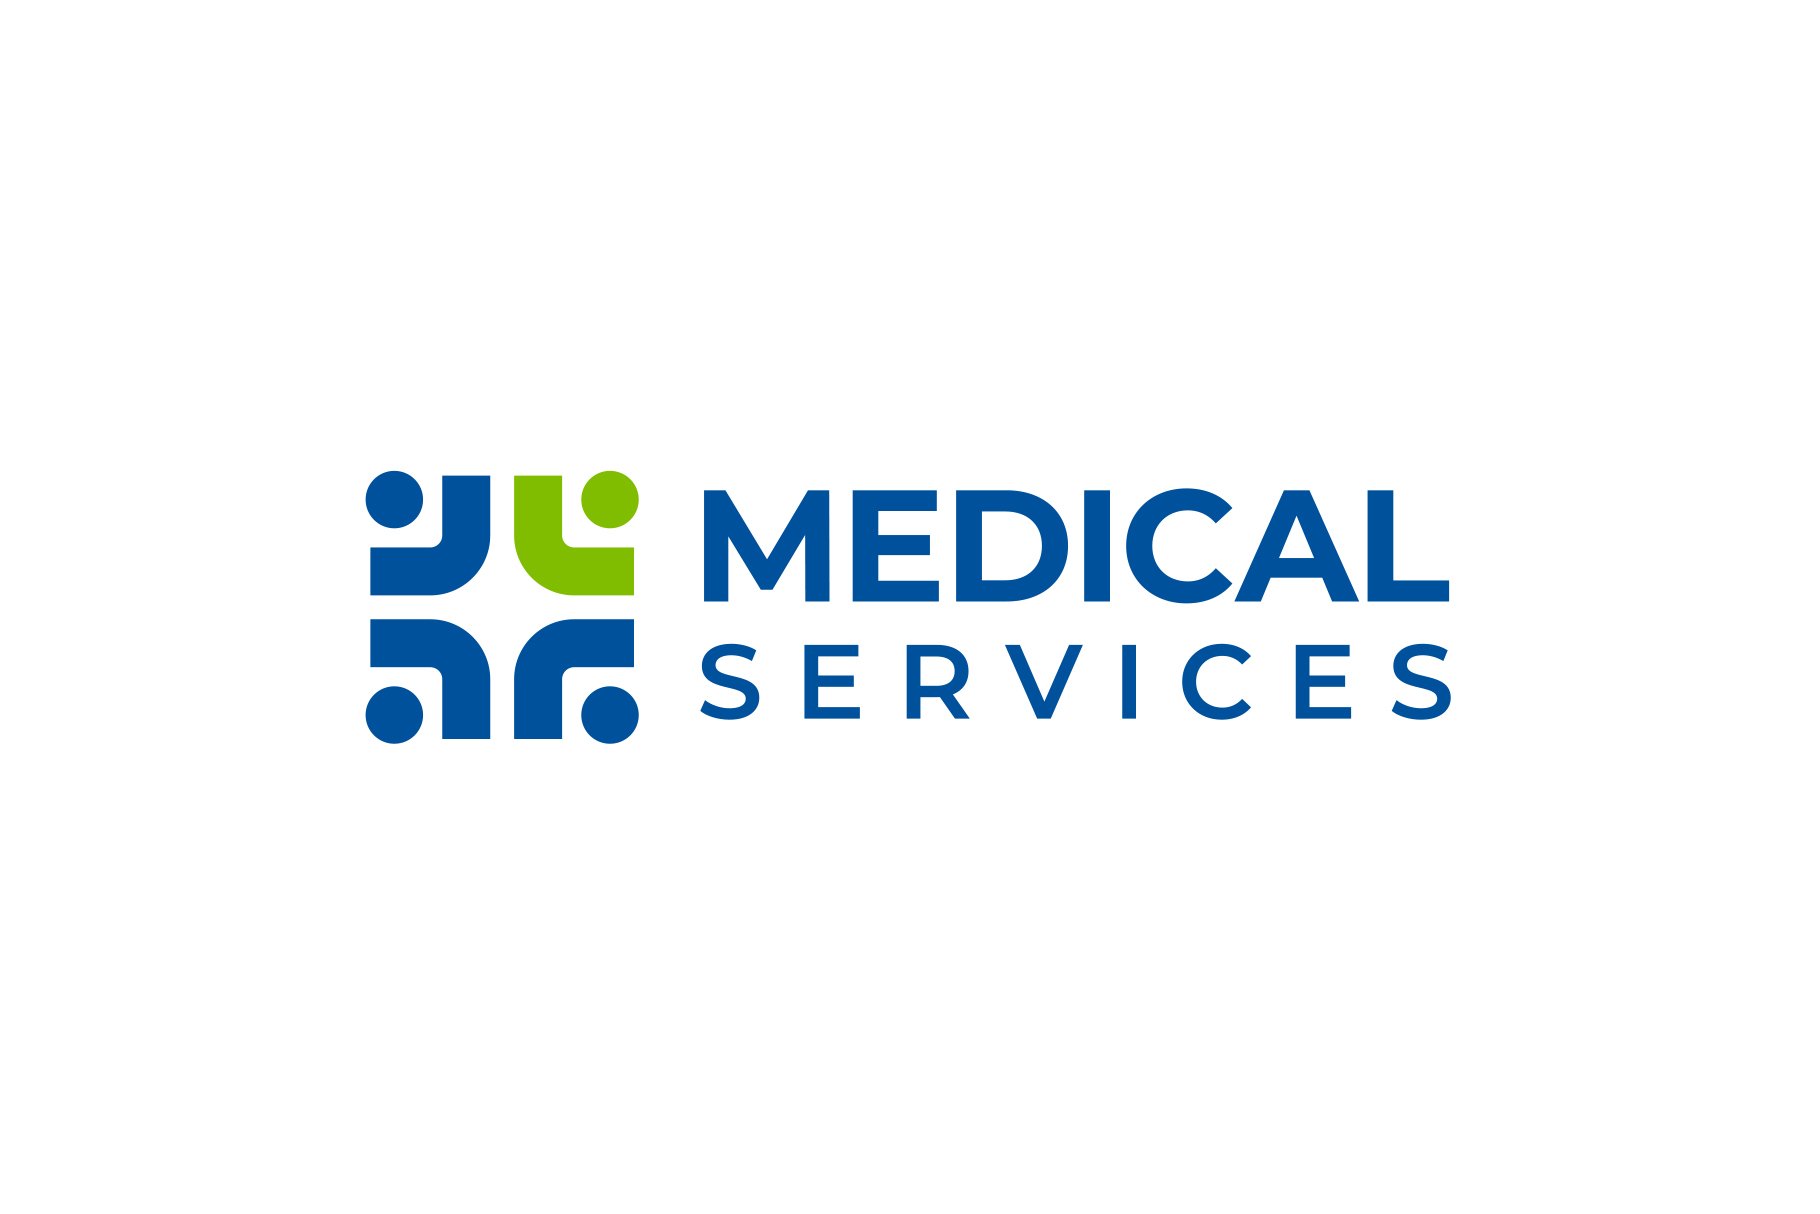 Health Care Medical Services Logo cover image.